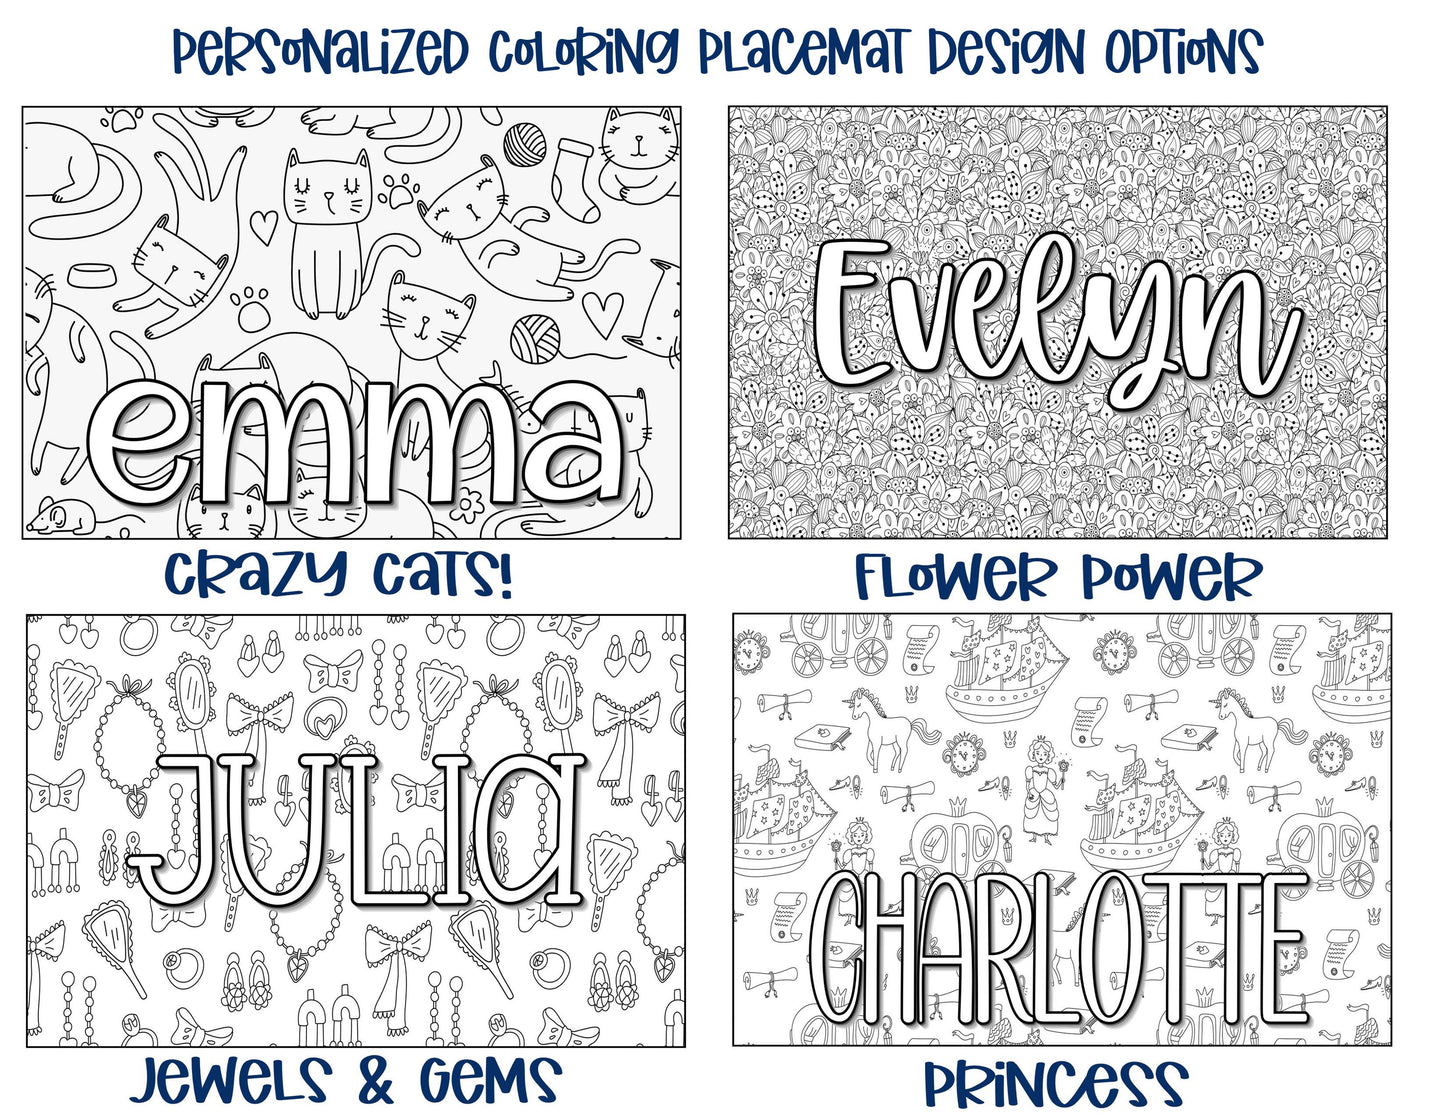 Personalized Coloring Name Placemat - Take Off Space Design